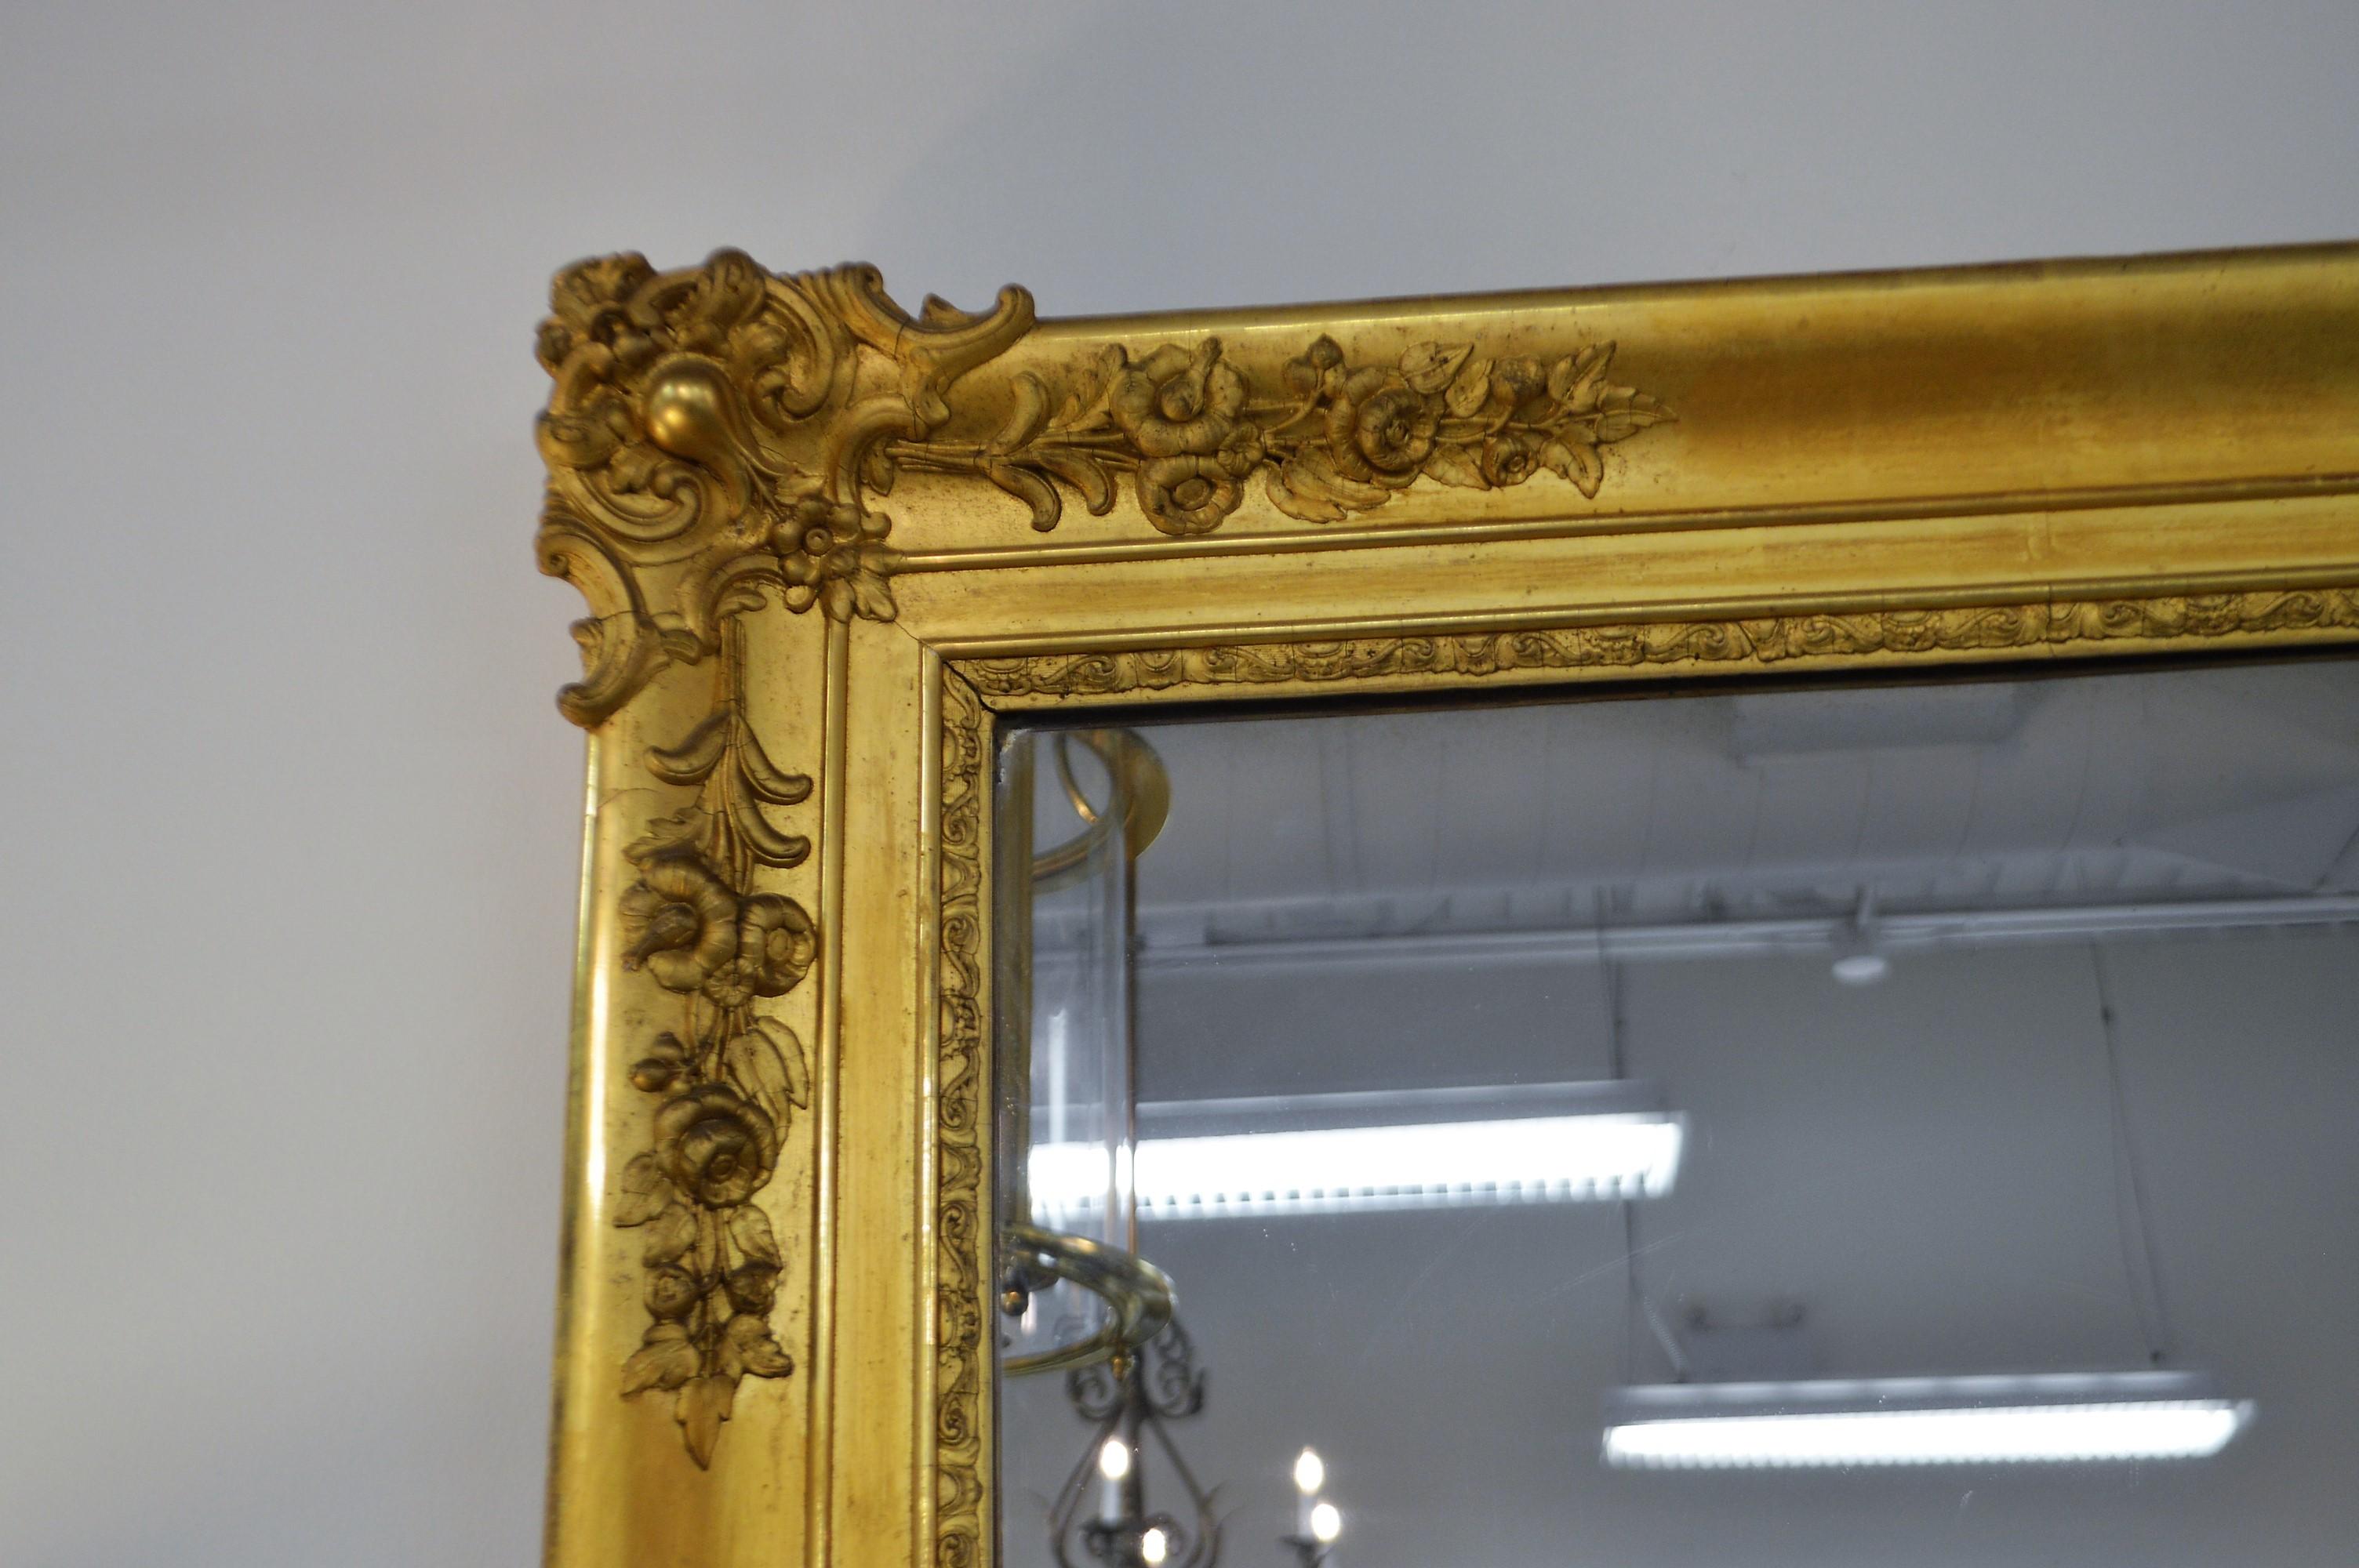 Excellent patina on this leaf gilded 19th century mirror from France. Hand carved details of crest with cascading of floral elements from all four corners.
The mirror is probably not the original one but it is in good condition.